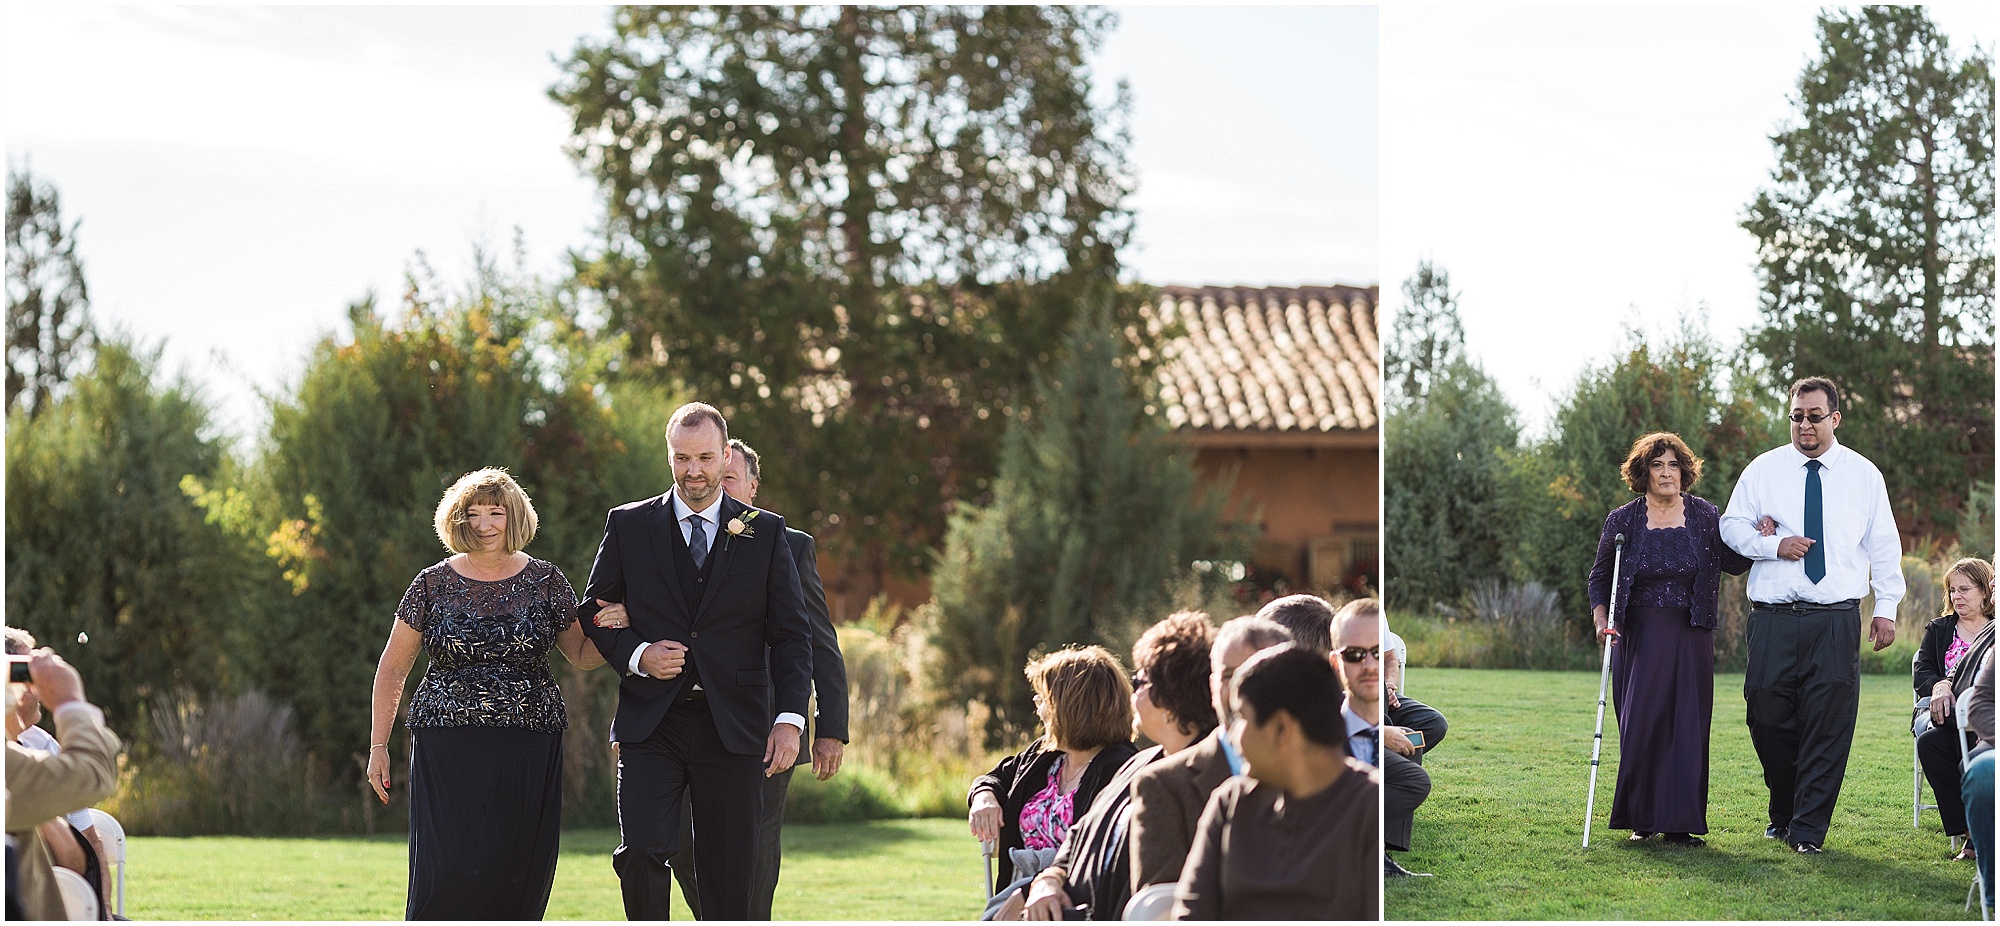 The mothers' of the groom & bride walk down the aisle at this beautiful Ranch at the Canyons fall wedding near Bend, OR. | Erica Swantek Photography